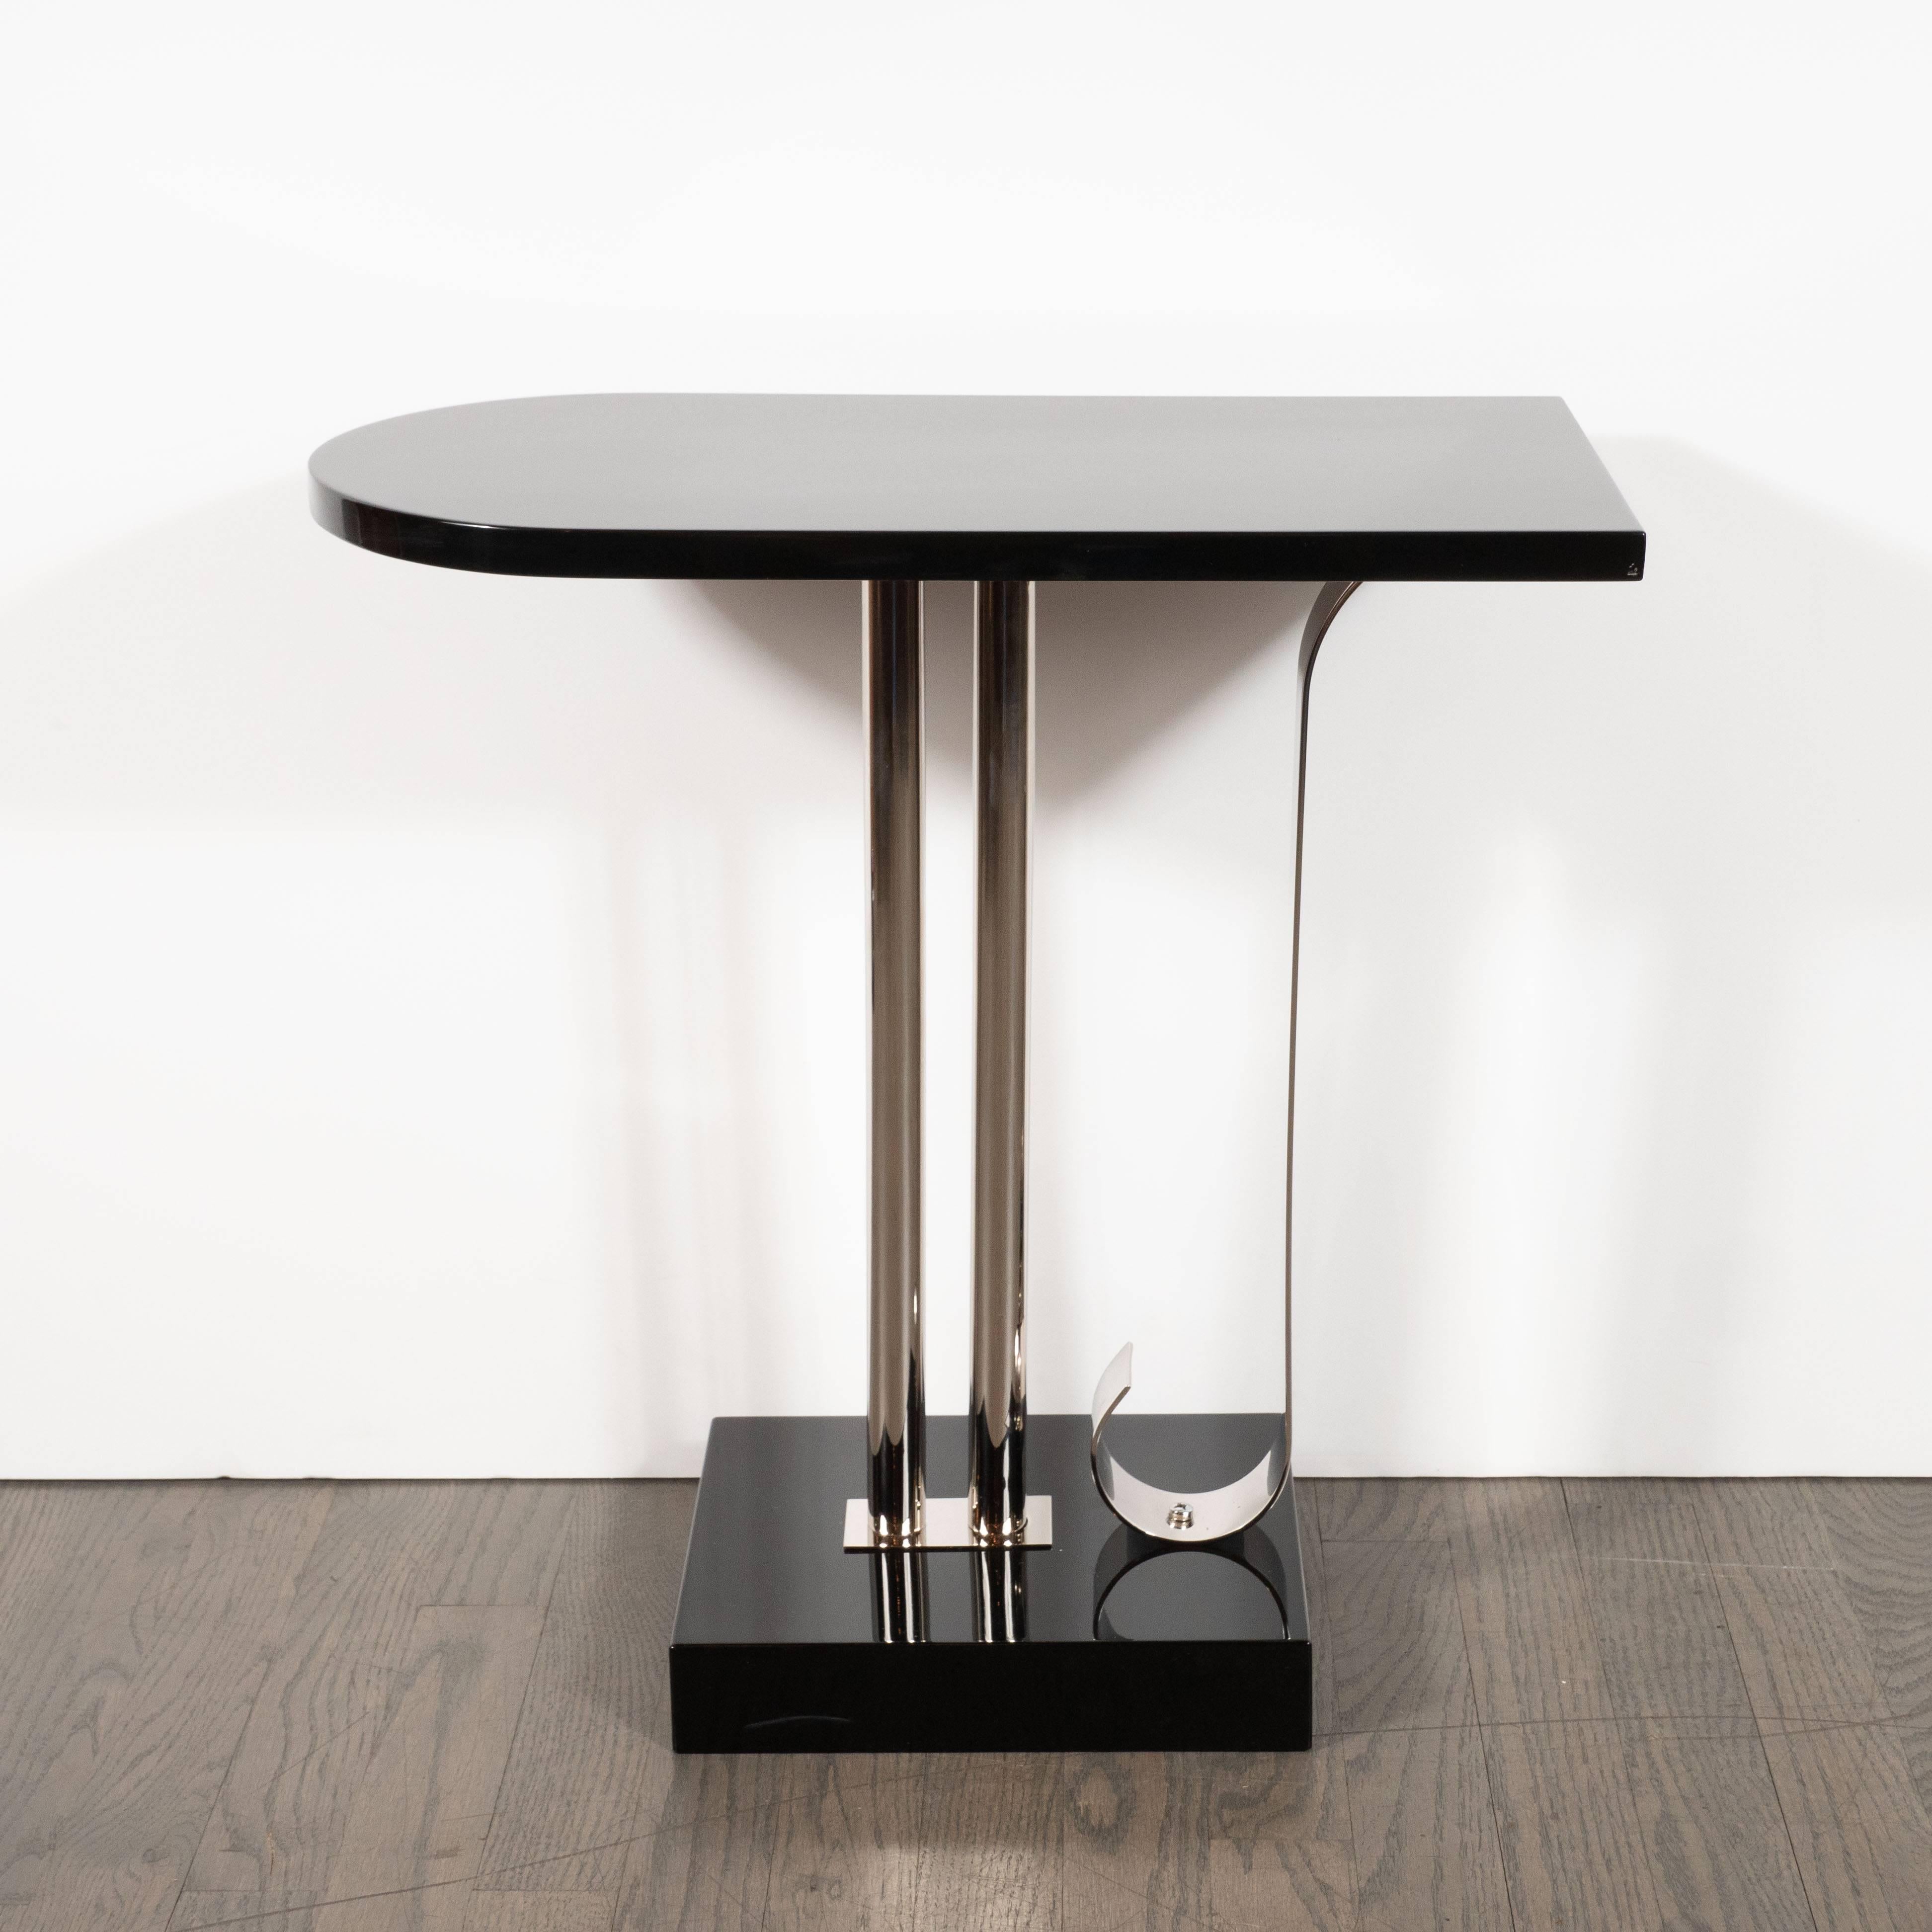 This sleek and sophisticated drinks or side table was realized in the United States by the esteemed maker, Belmet Products, circa 1935. Its top- executed in lustrous black lacquer- offers a streamlined form suggestive of a bullet, indicative of the